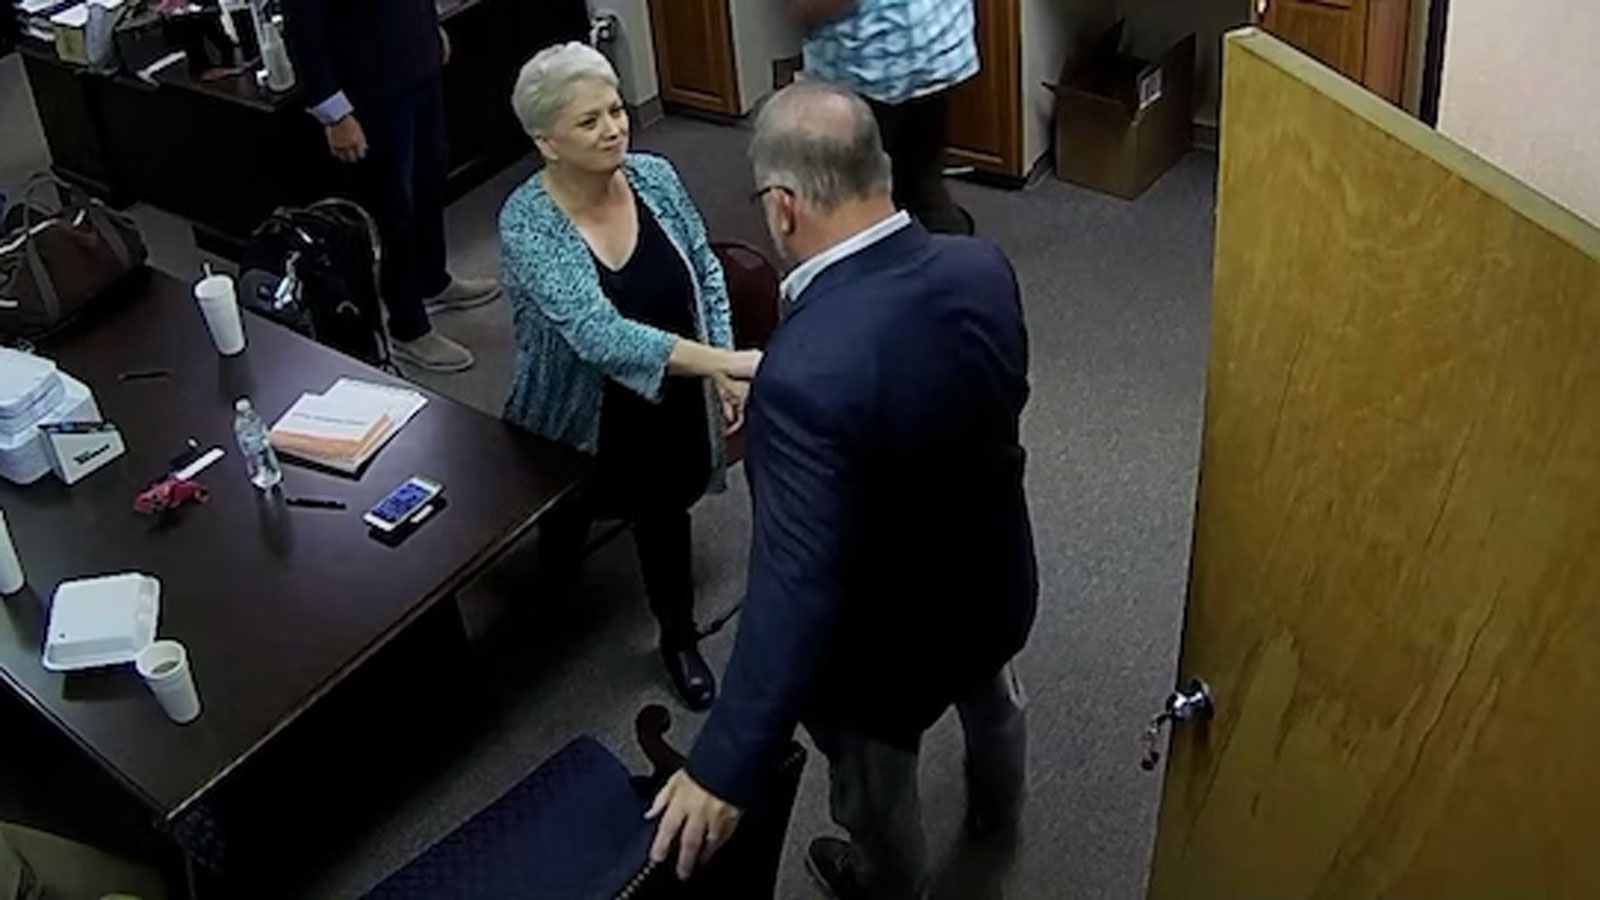 Coffee County Republican Party Chair Cathy Latham shakes hands with Georgia businessman Scott Hall on January 7, 2021 at the county election office.